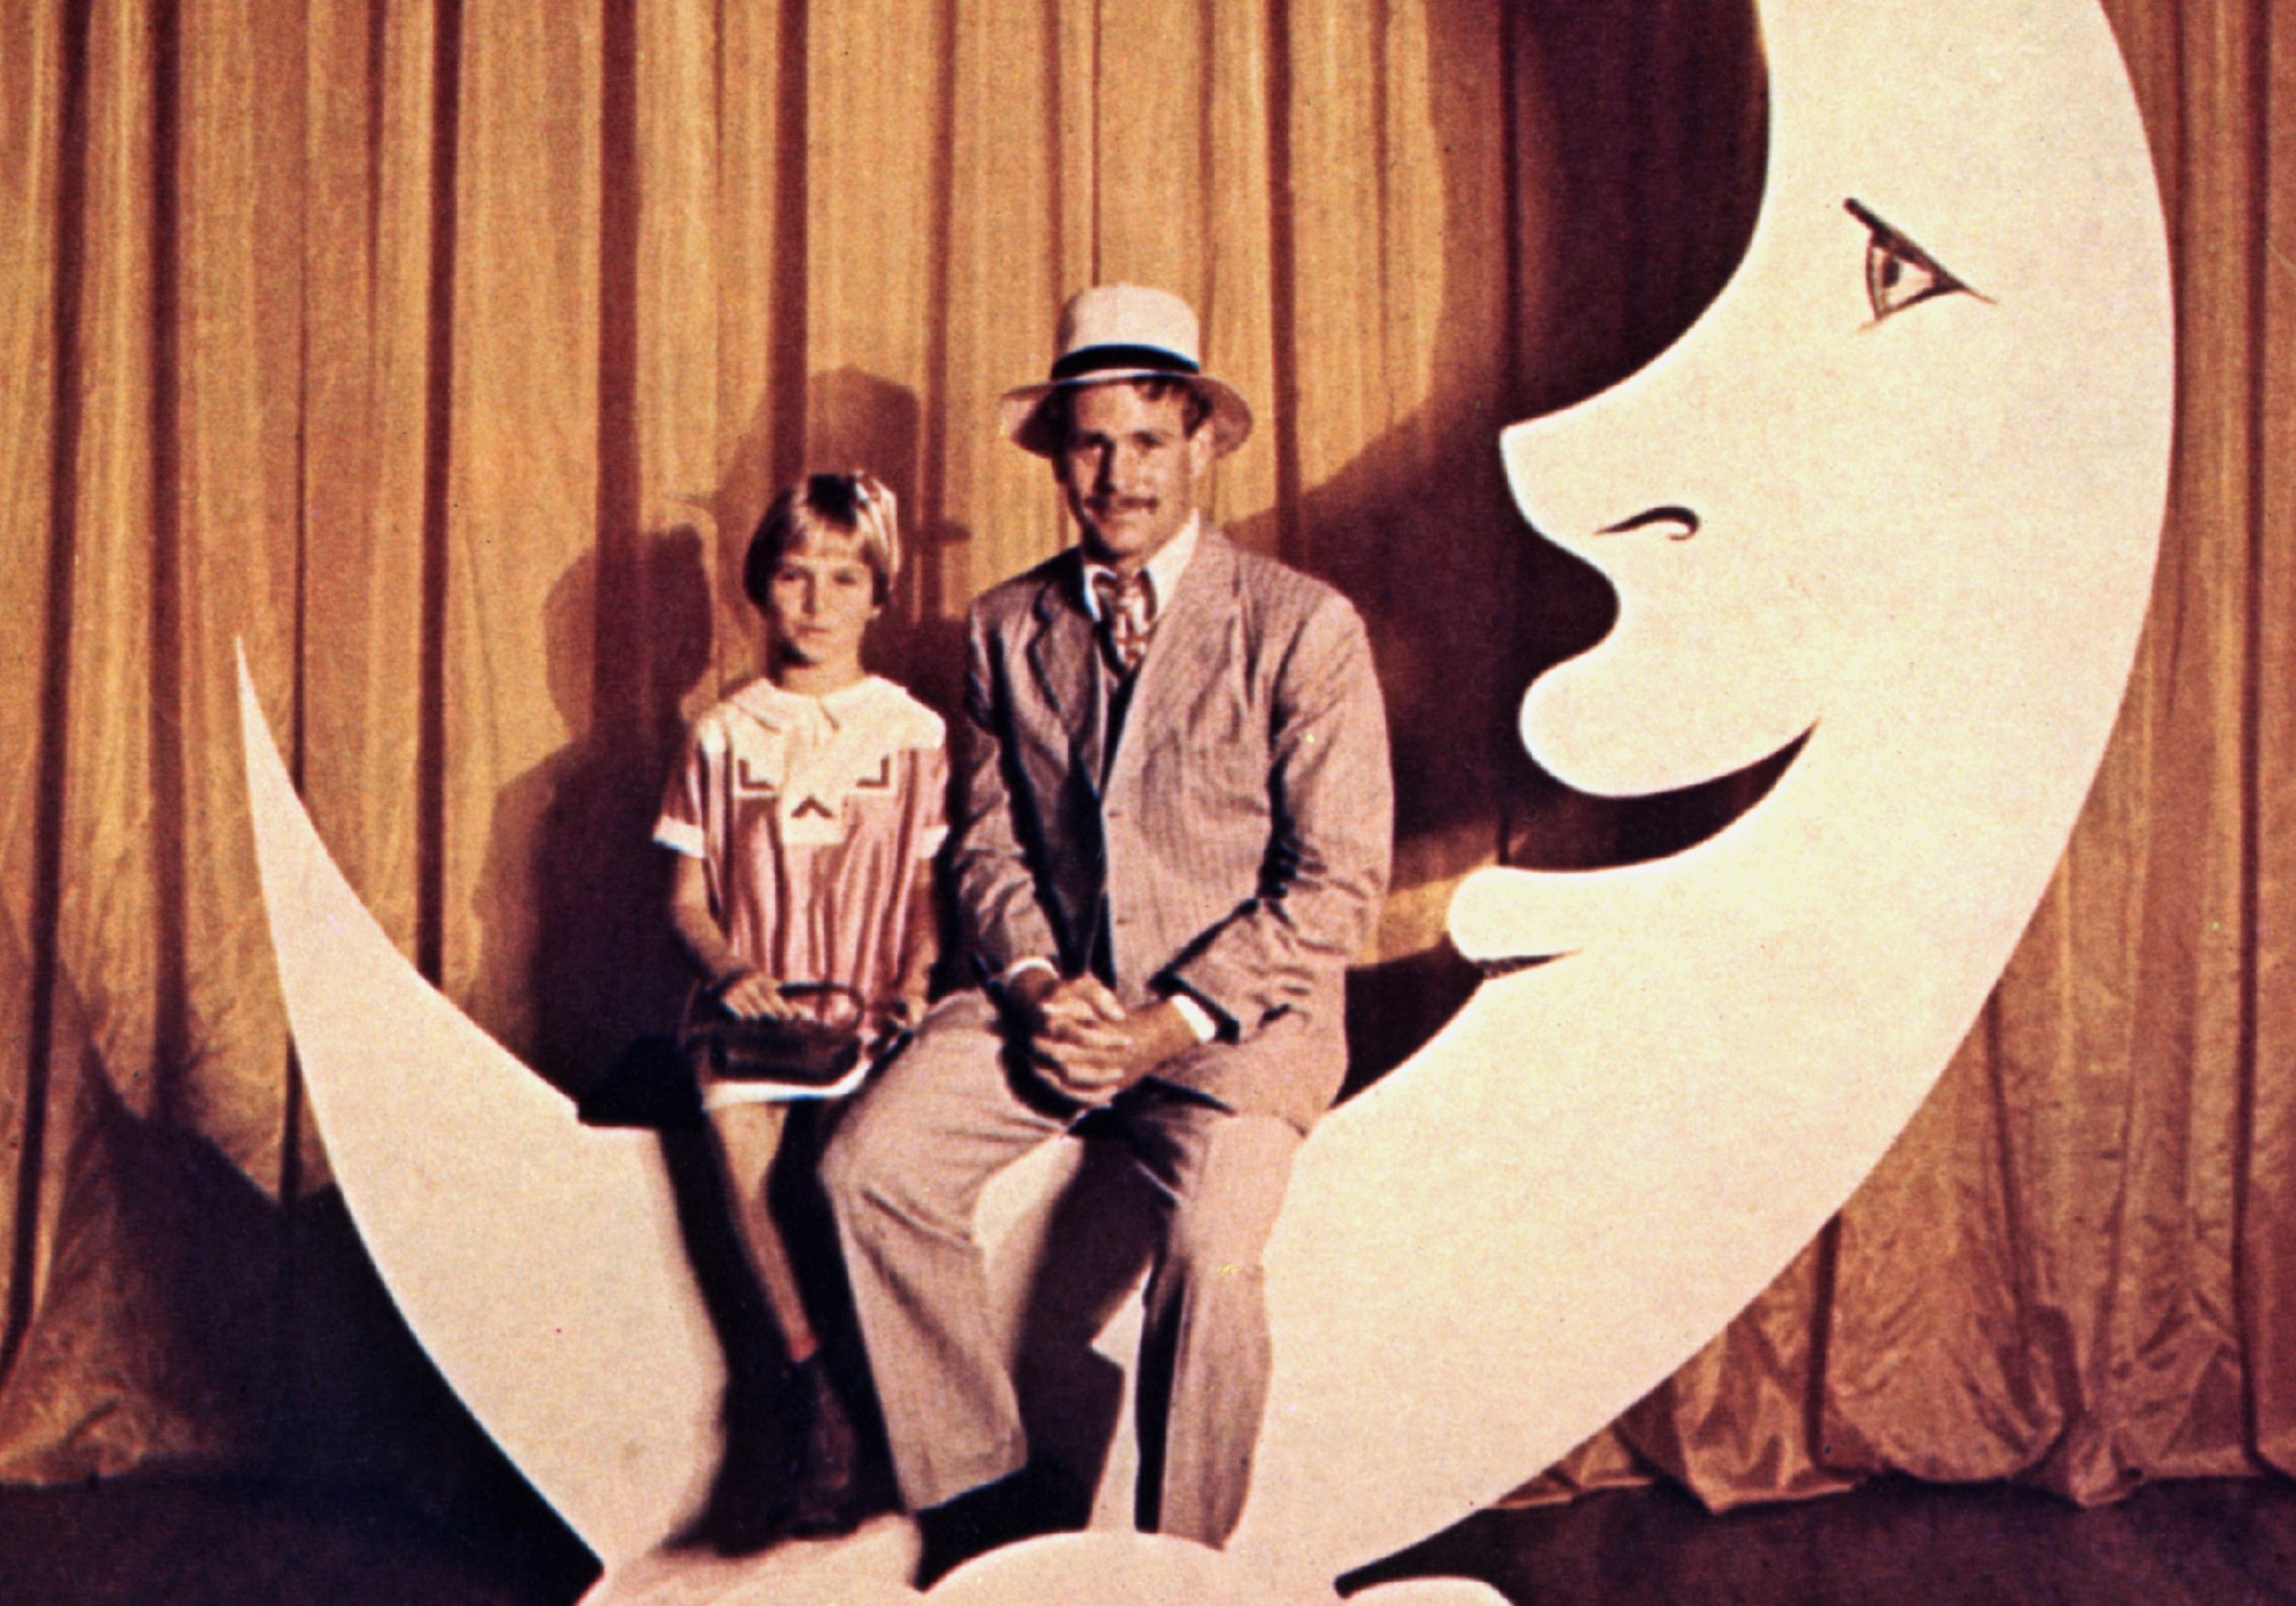 Tatum O'Neal und Ryan O'Neal in "Paper Moon", ca. 1973 | Quelle: Getty Images